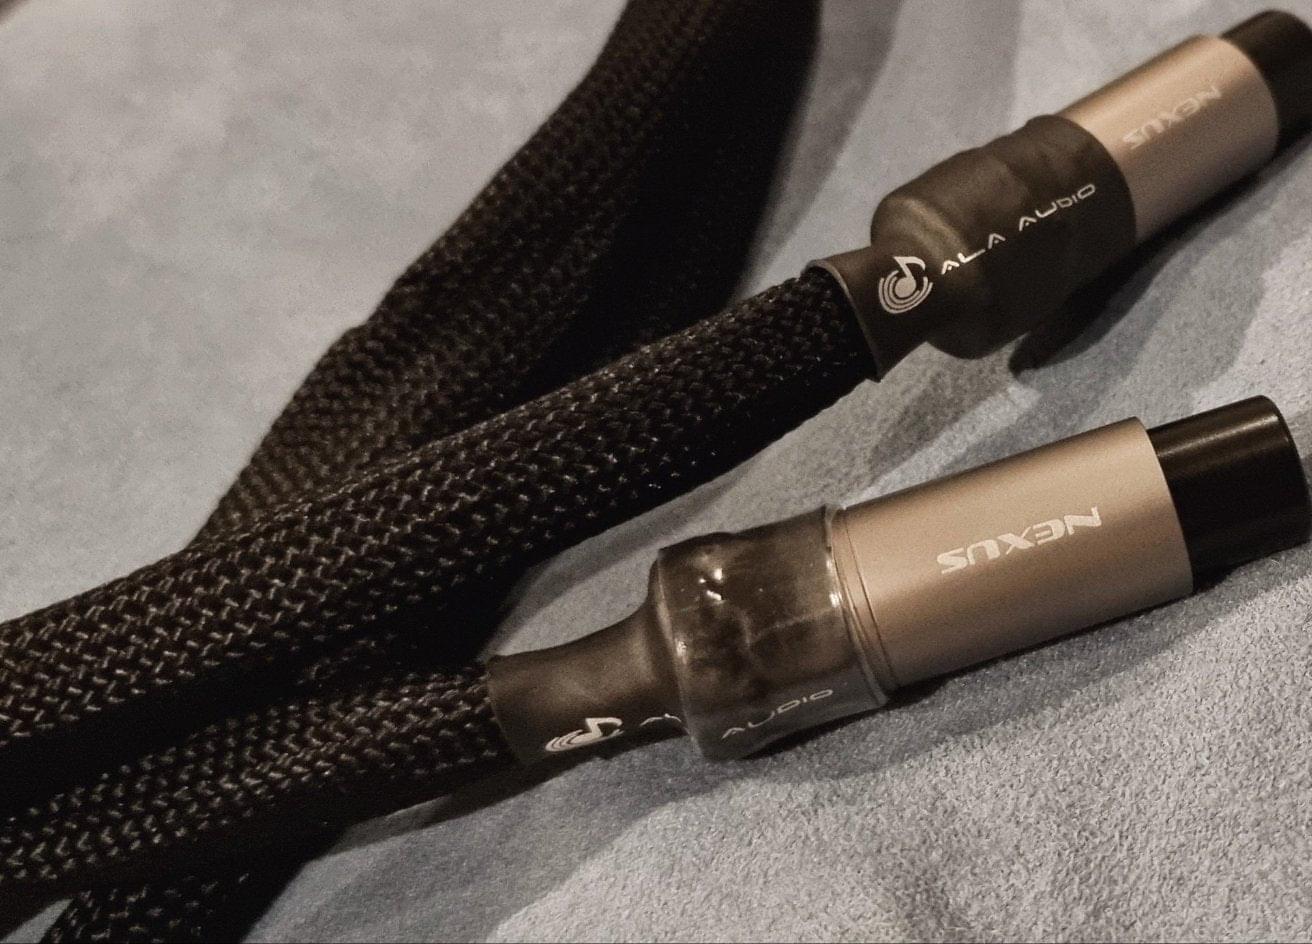 Ag-Ribbon Reference XLR Interconnect Cables by A.L.A